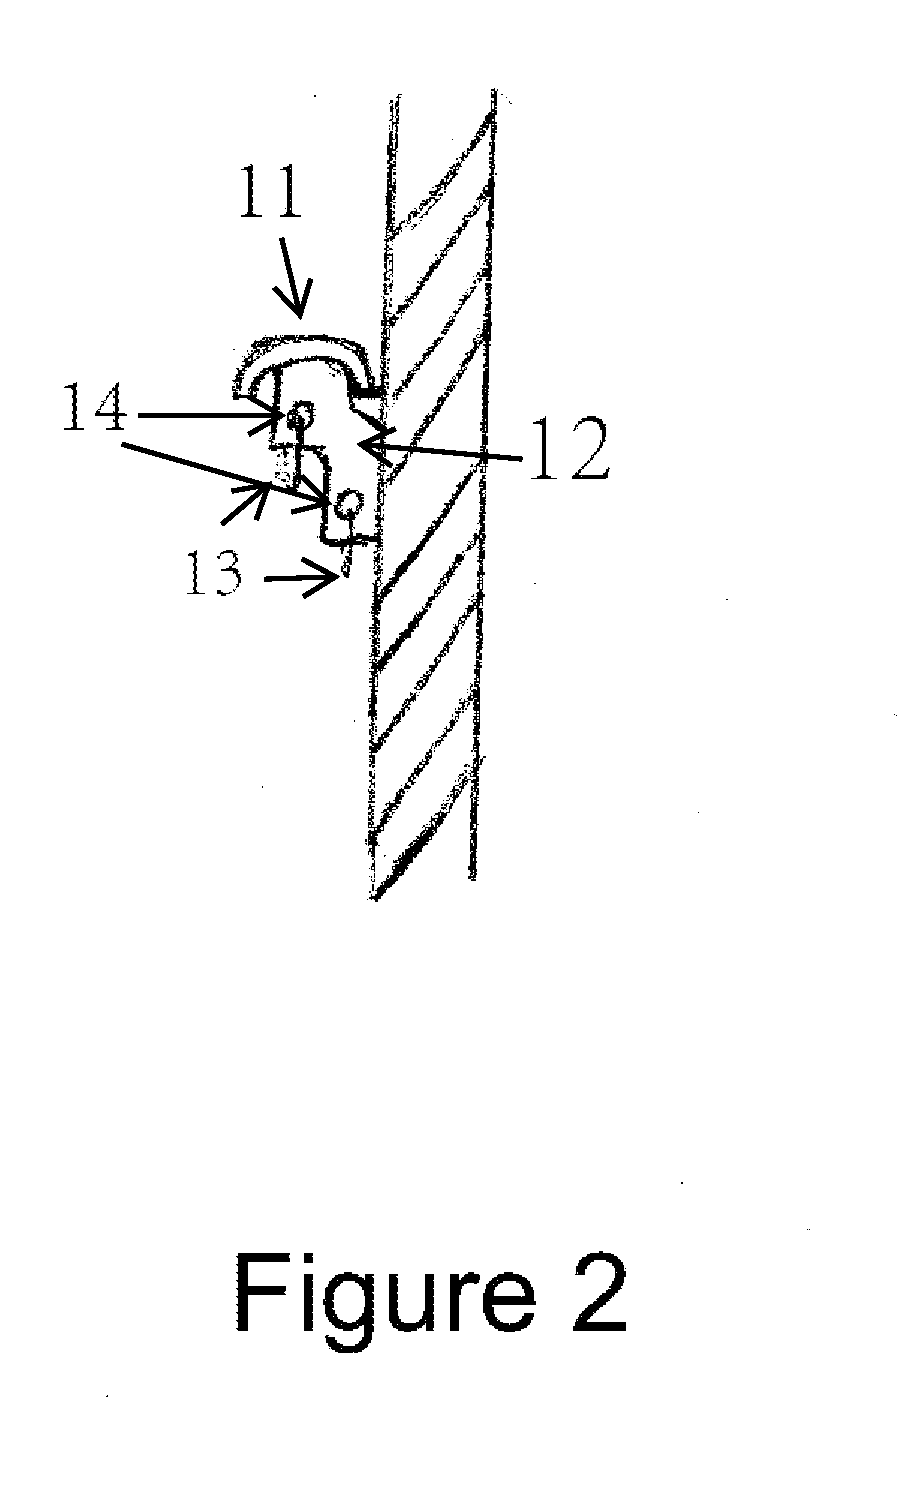 Apparatus and methods for transmission line based electric fence insulation